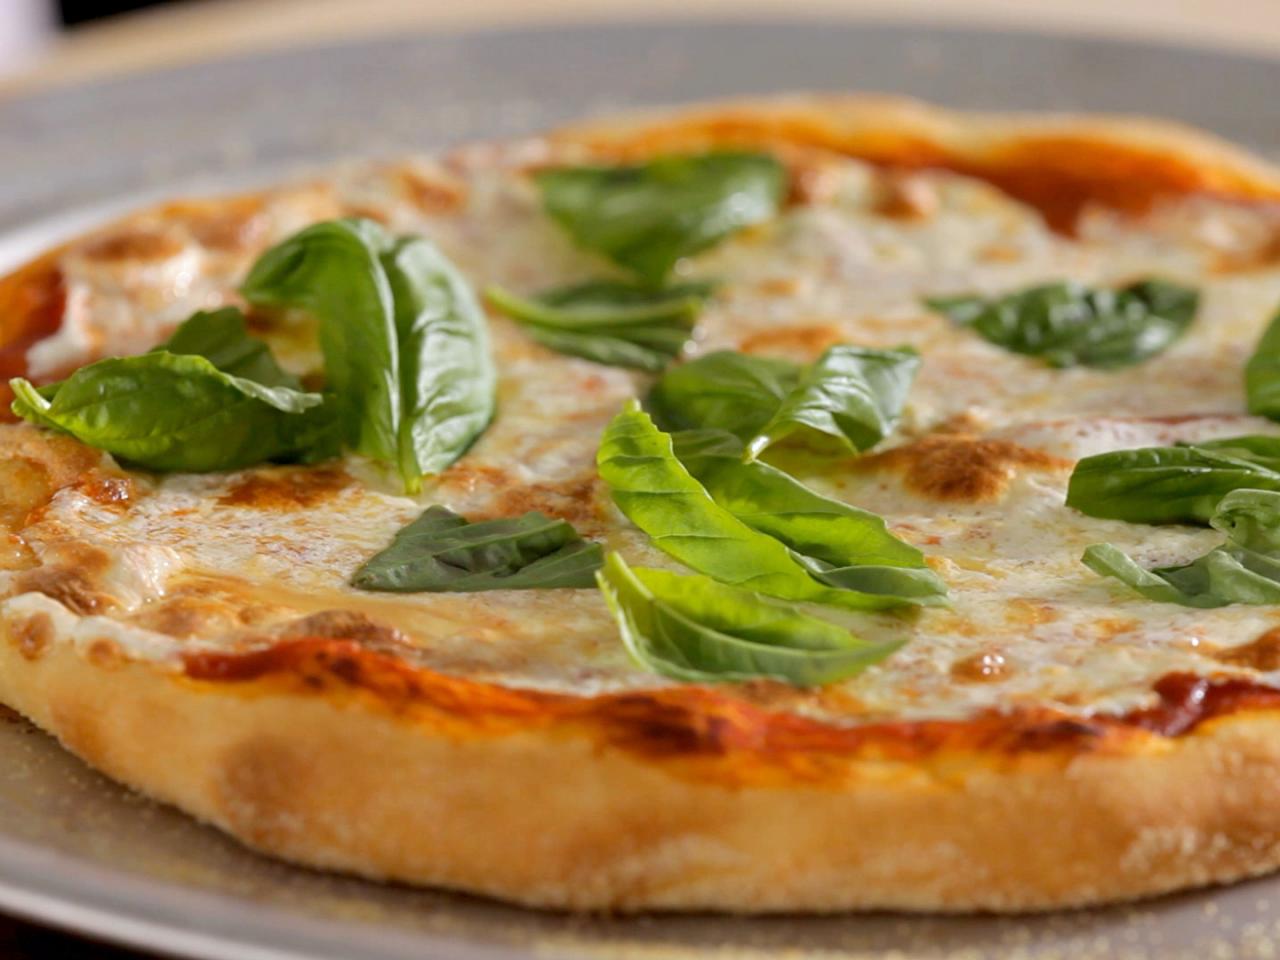 6 easy steps that will help you make your own pizza at home from scratch